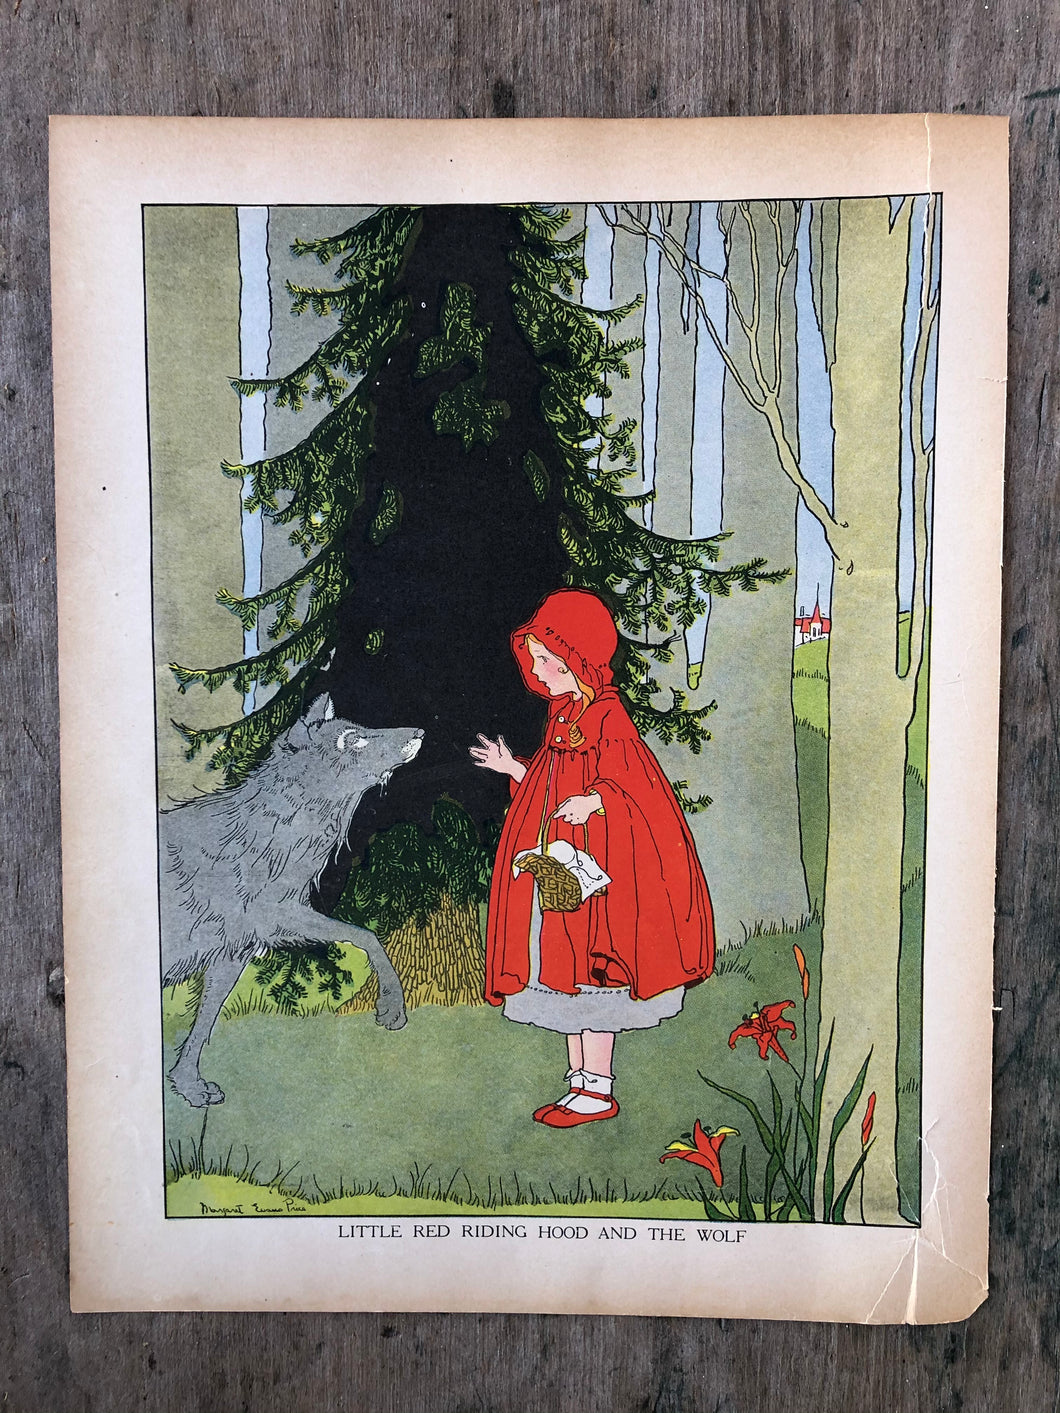 Print illustrated by Margaret Evans Price from “Once Upon a Time: A Book of Old-Time Fairy Tales”